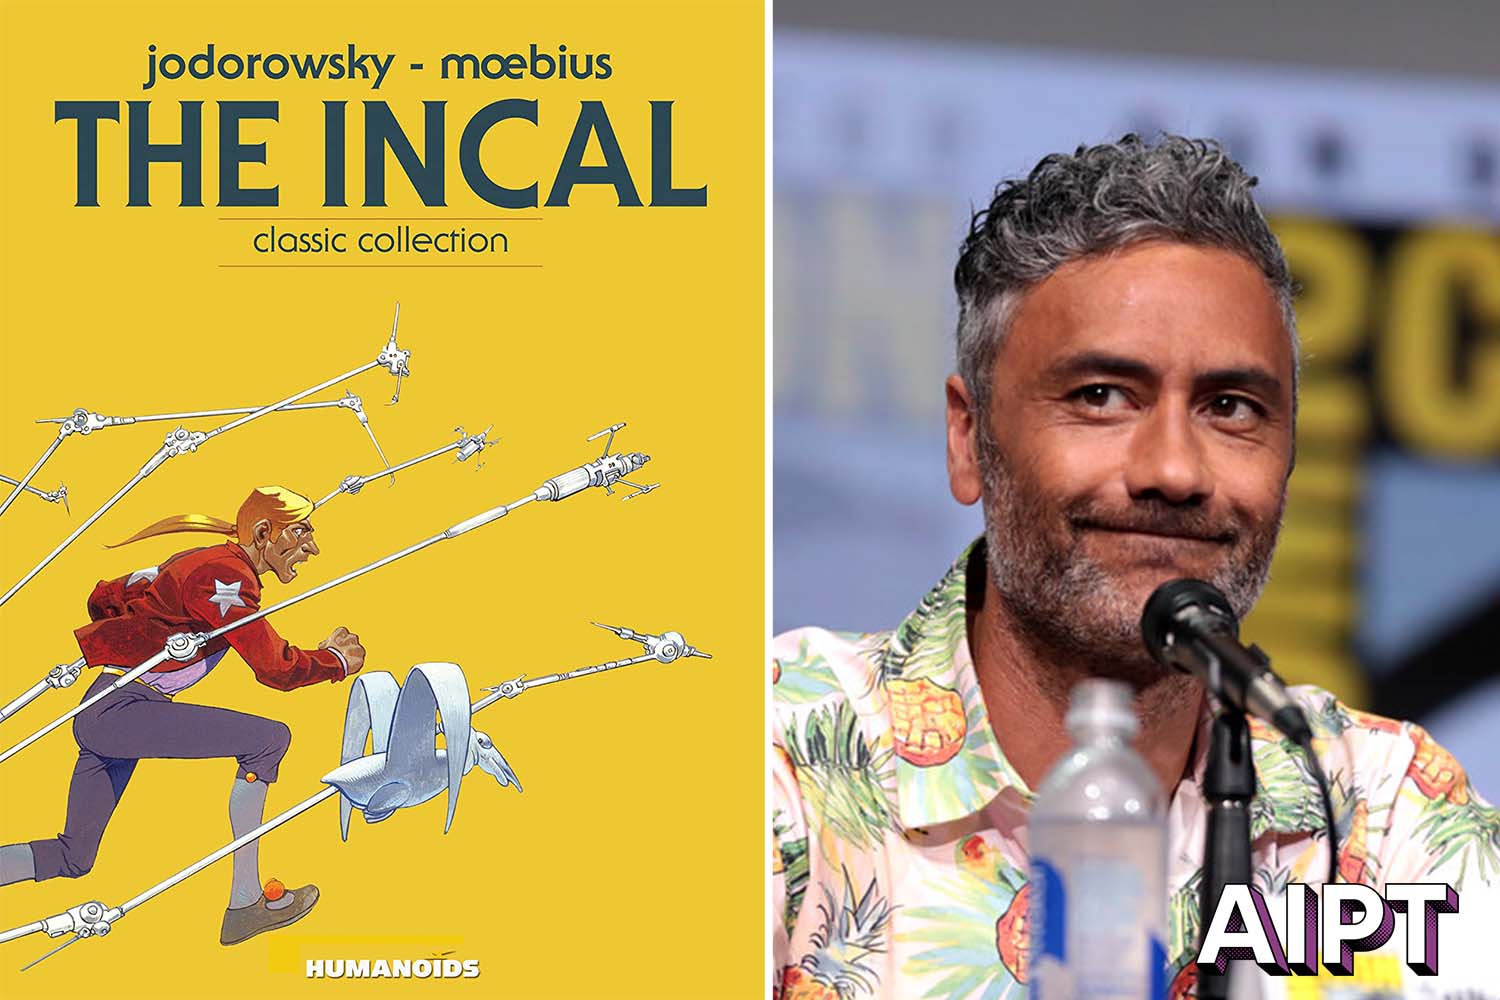 Taika Waititi moving on from 'Thor' to direct 'The Incal' movie